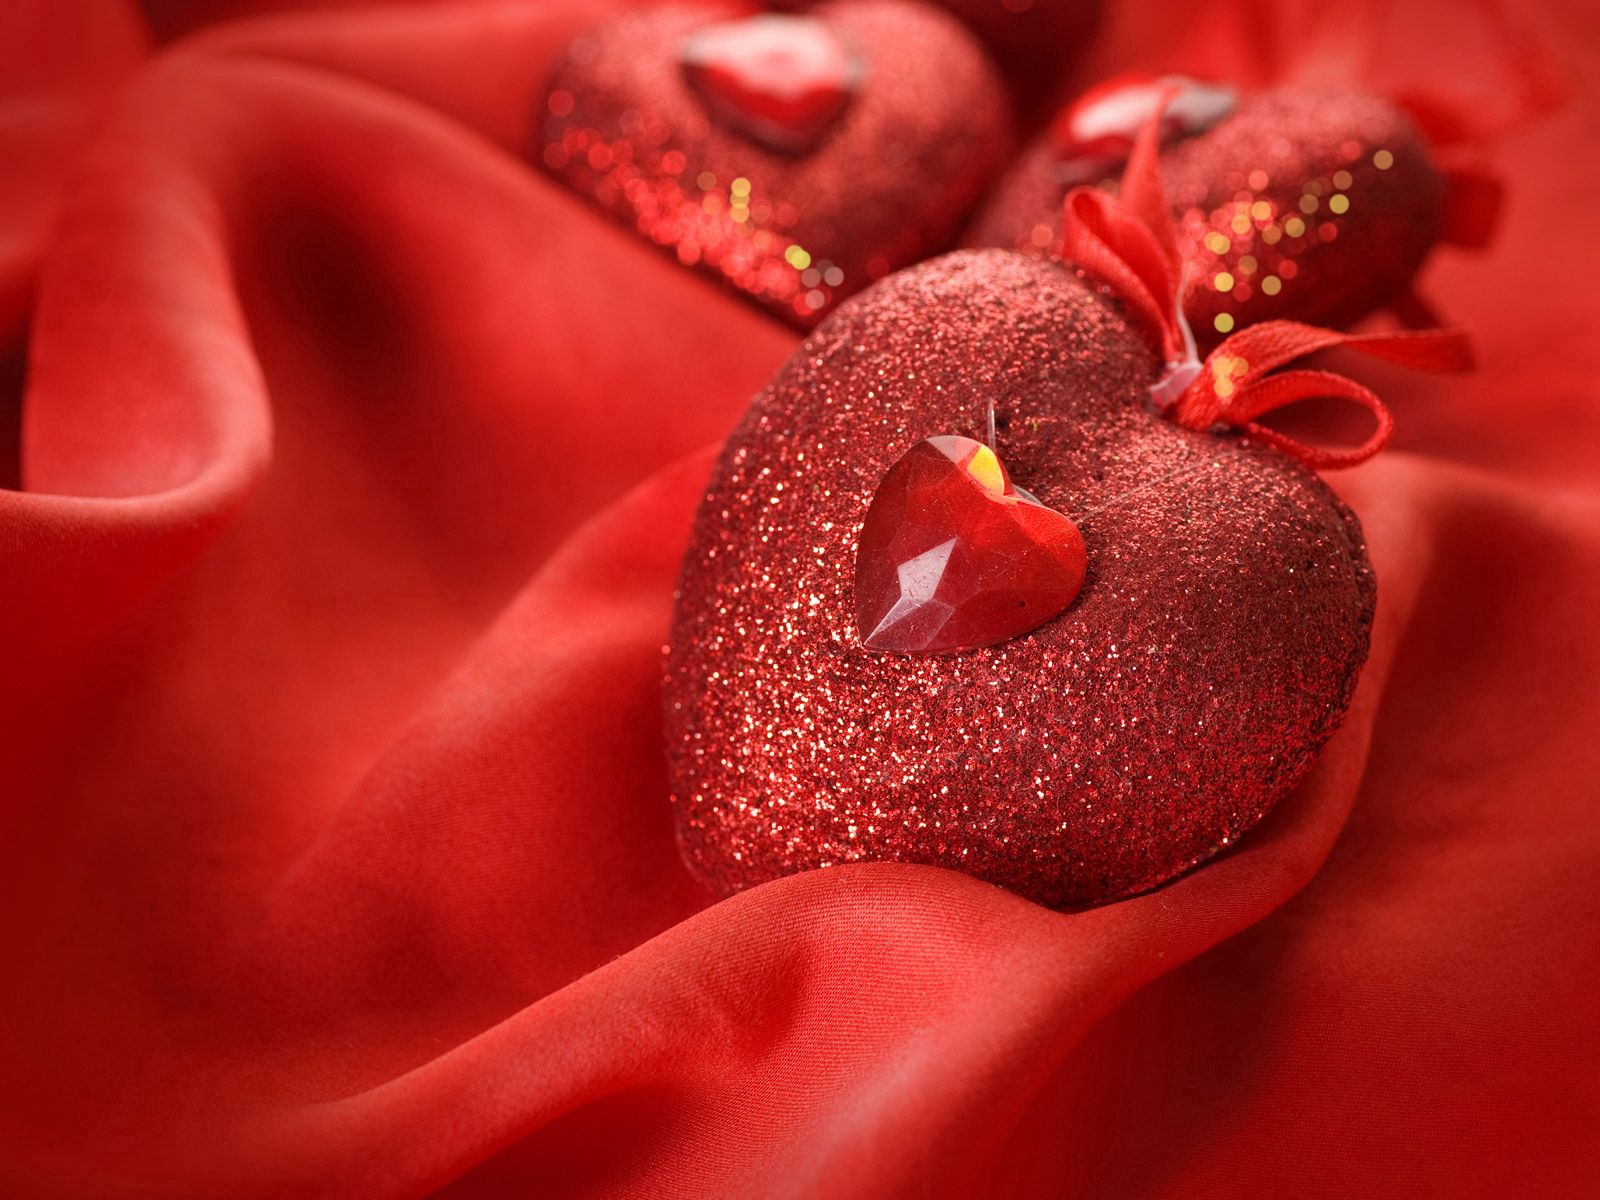 54466 download wallpaper love, red, present, gift, heart, silk screensavers and pictures for free